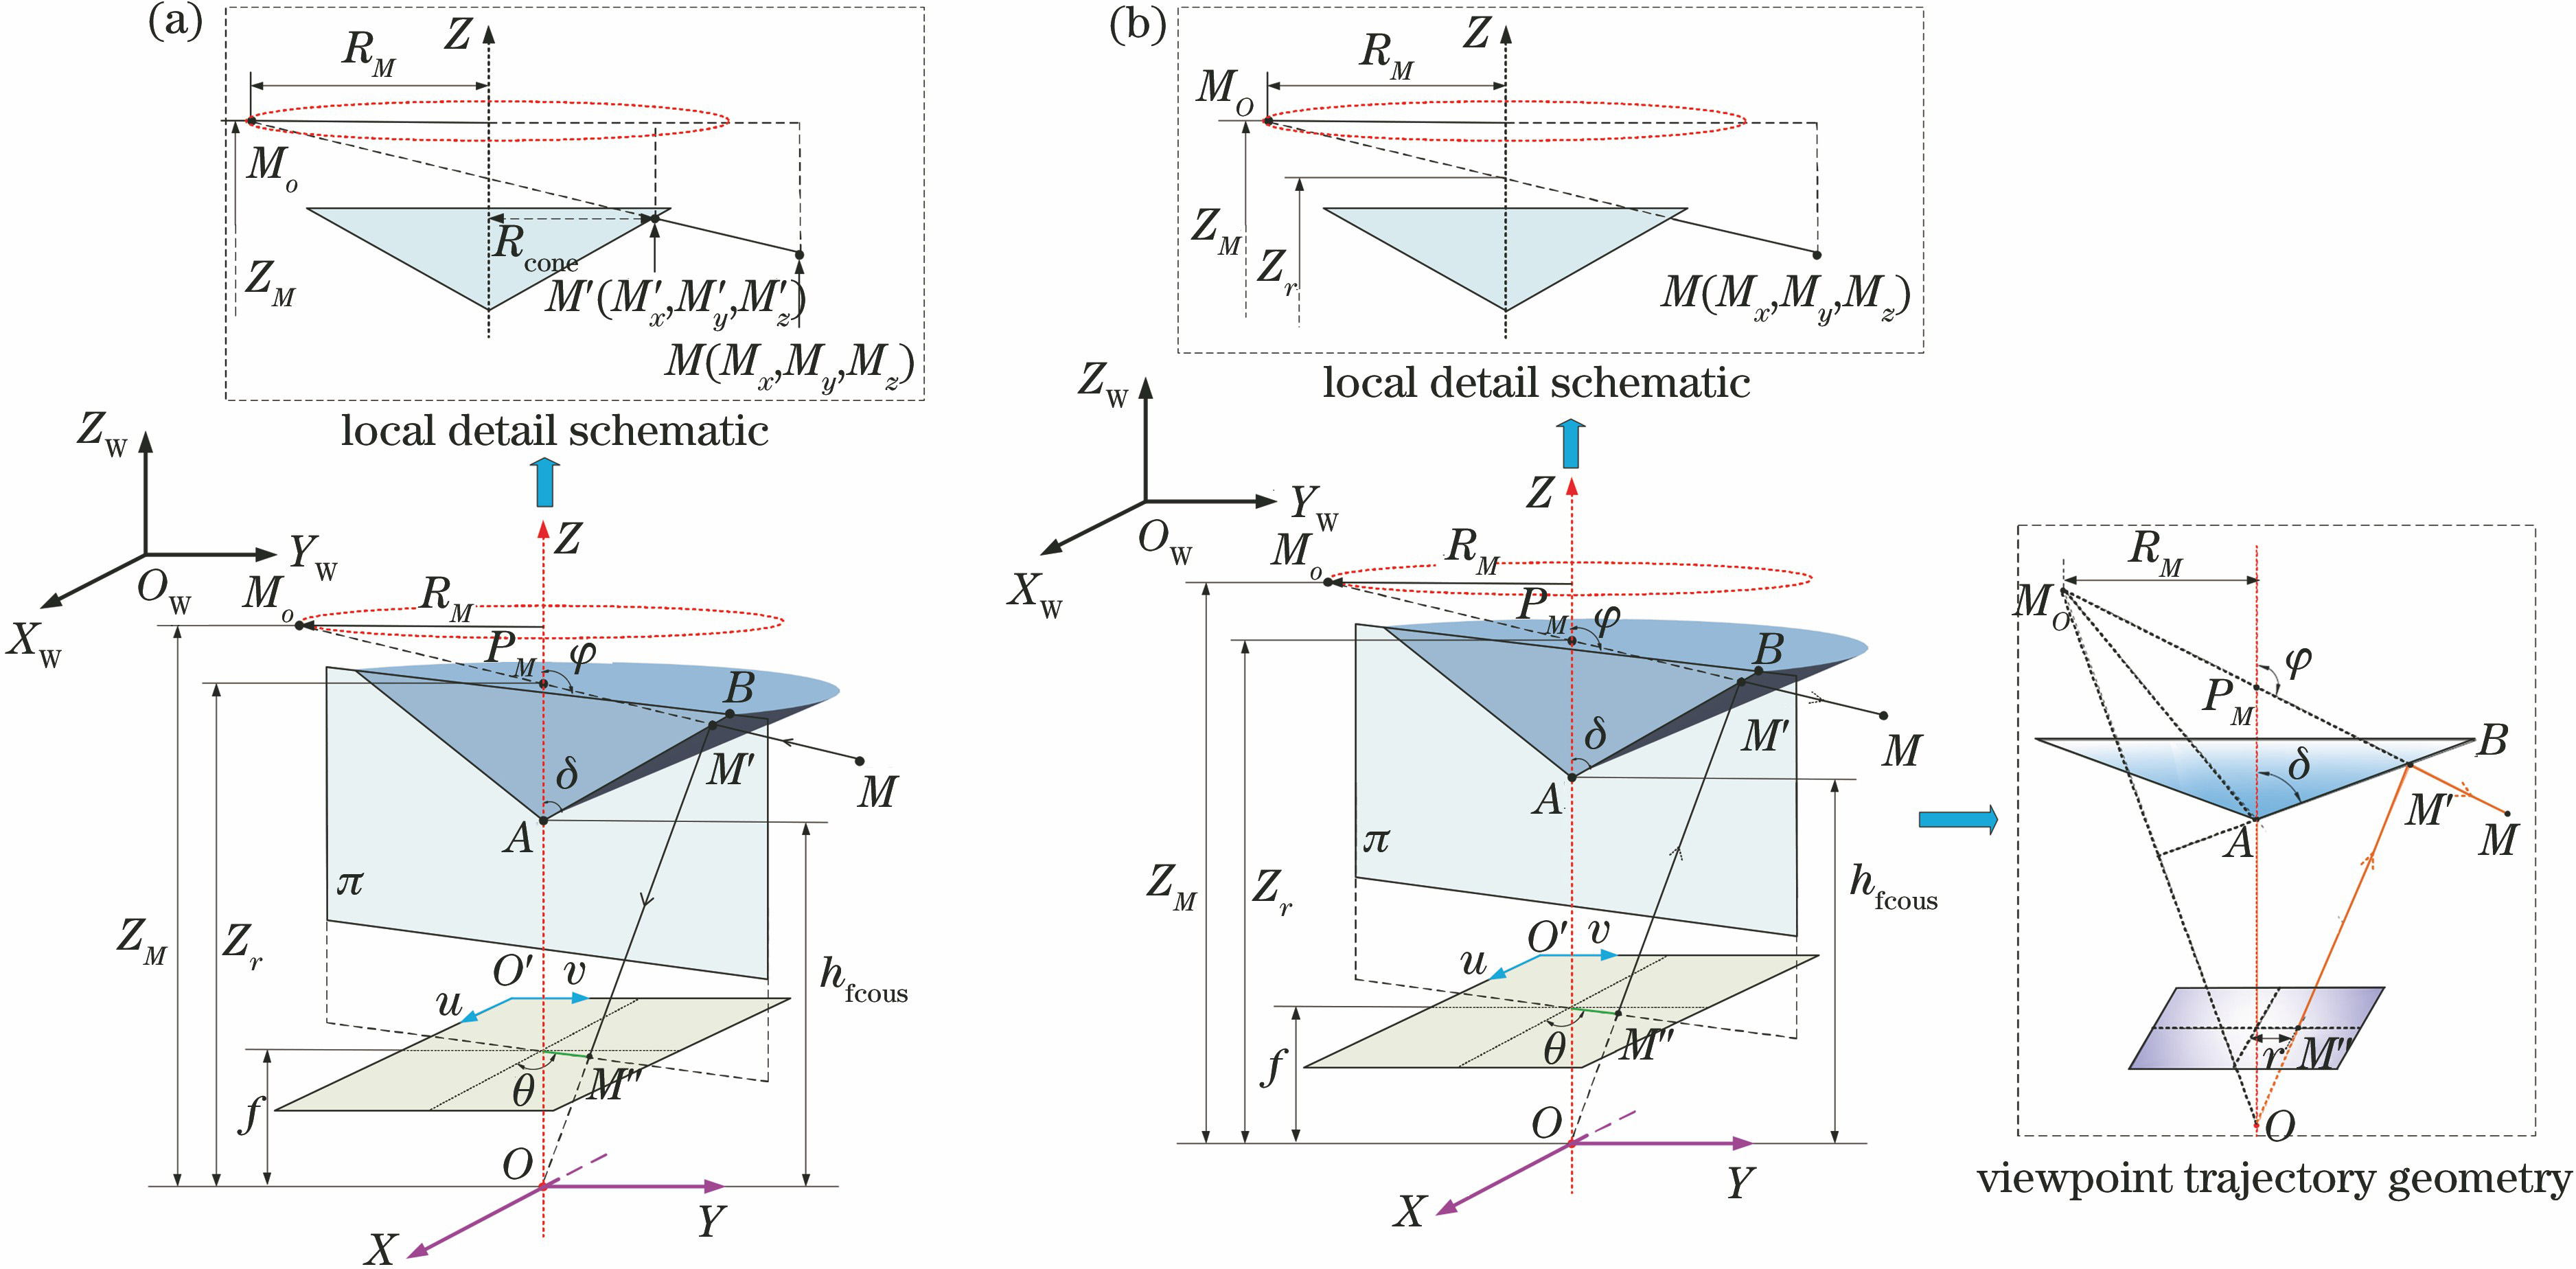 Schematic of the projection model of the cone of point M. (a) Forward model; (b) reverse model